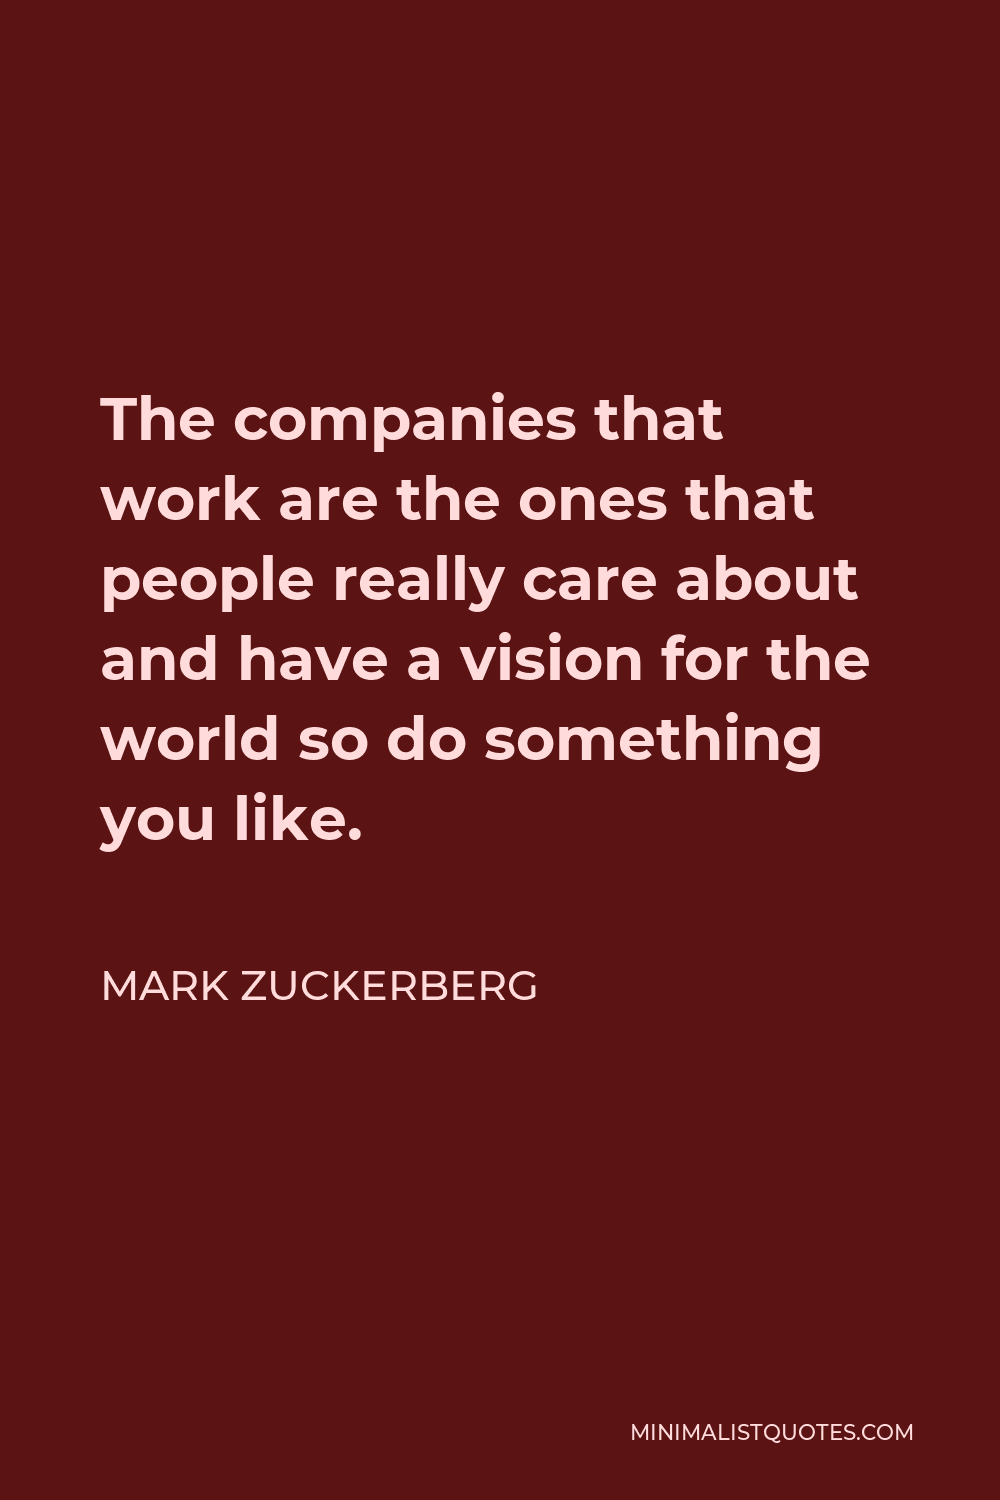 Mark Zuckerberg Quote - The companies that work are the ones that people really care about and have a vision for the world so do something you like.